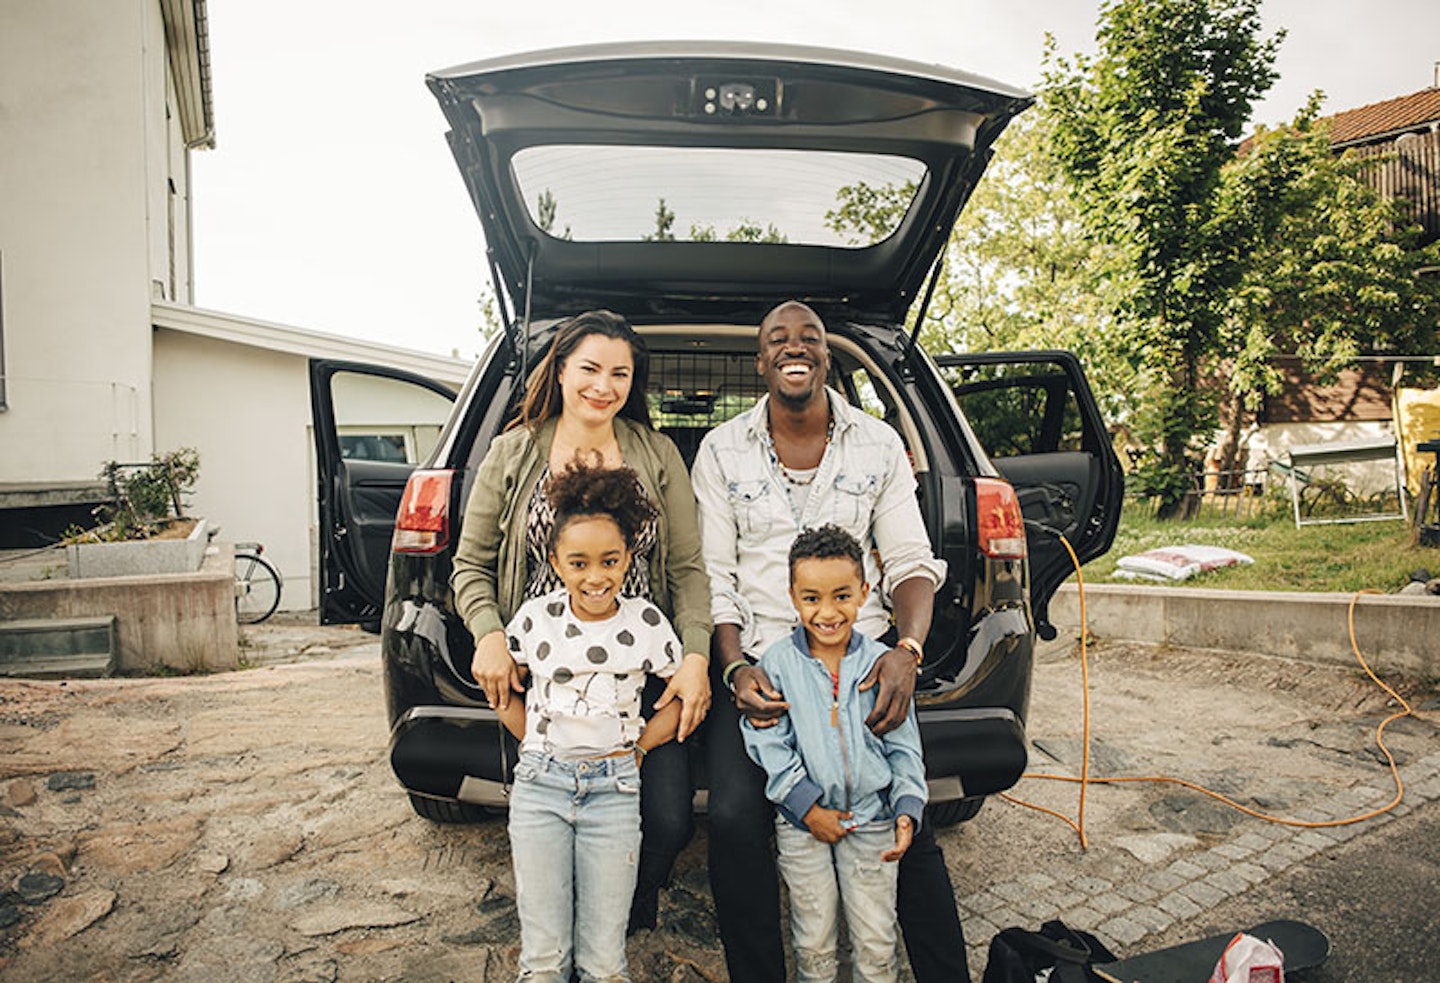 18 of the best family SUVs